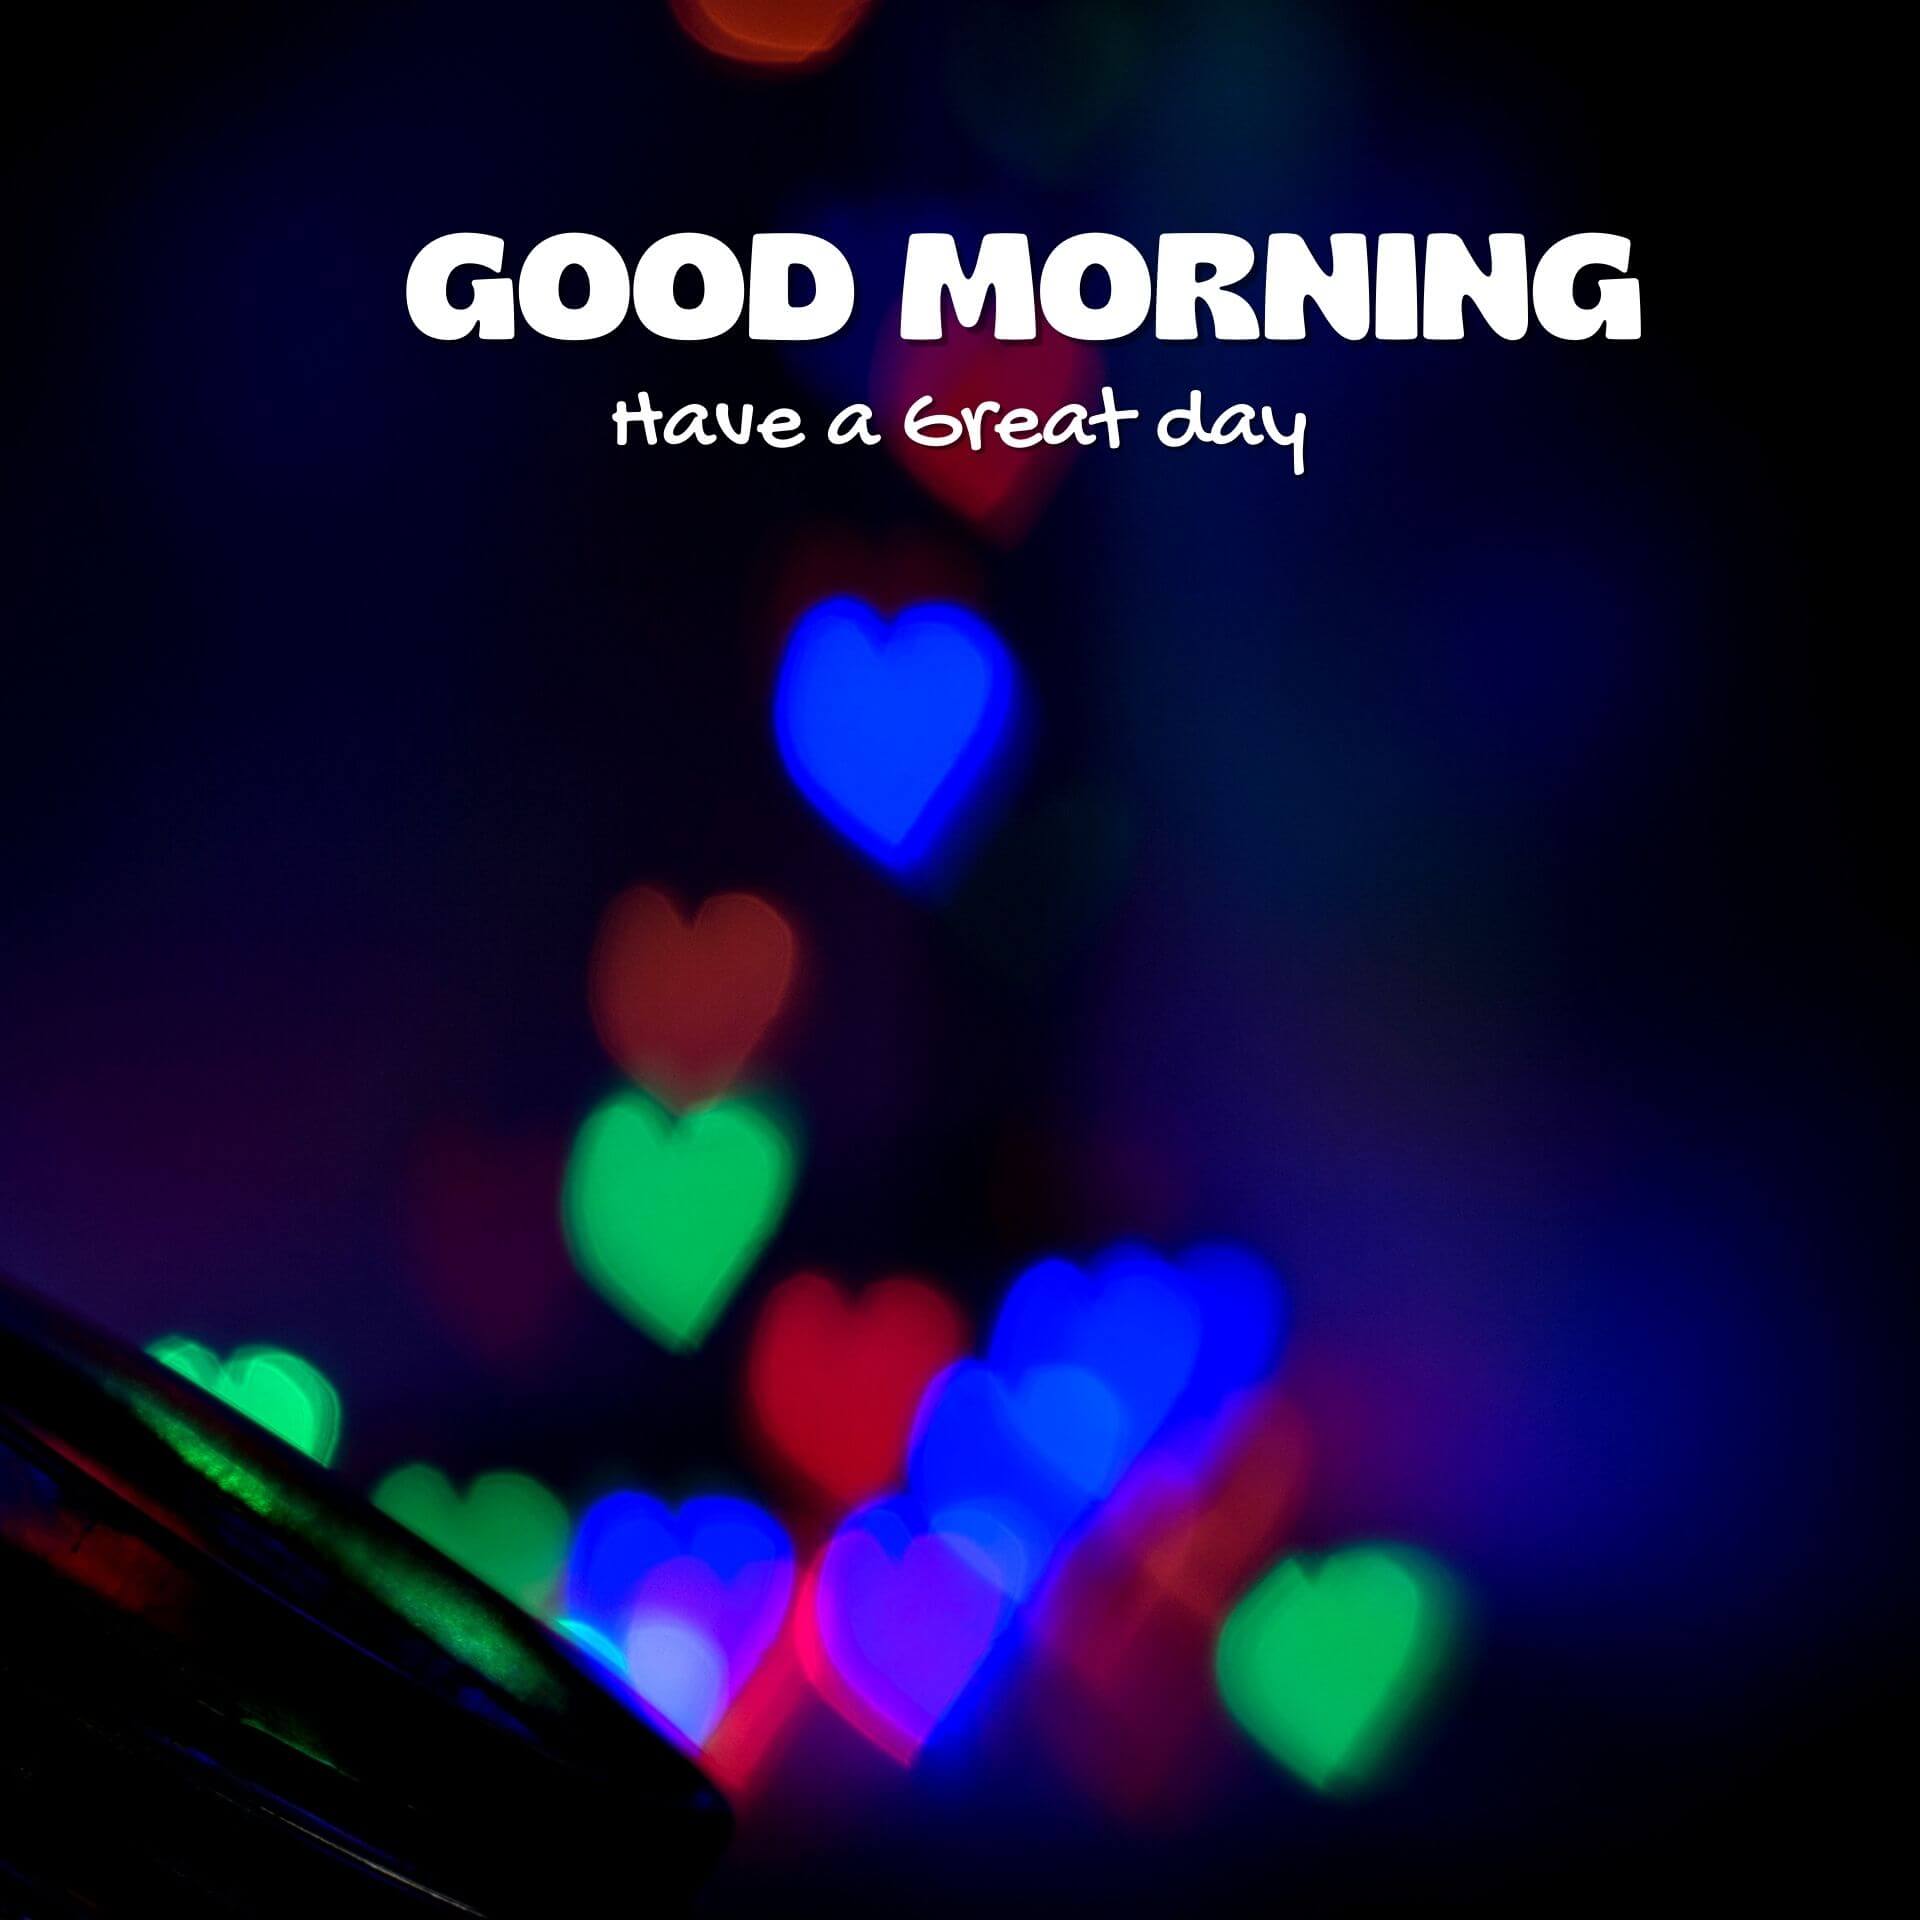 Good morning have a nice day Wallpaper HD Download 2023